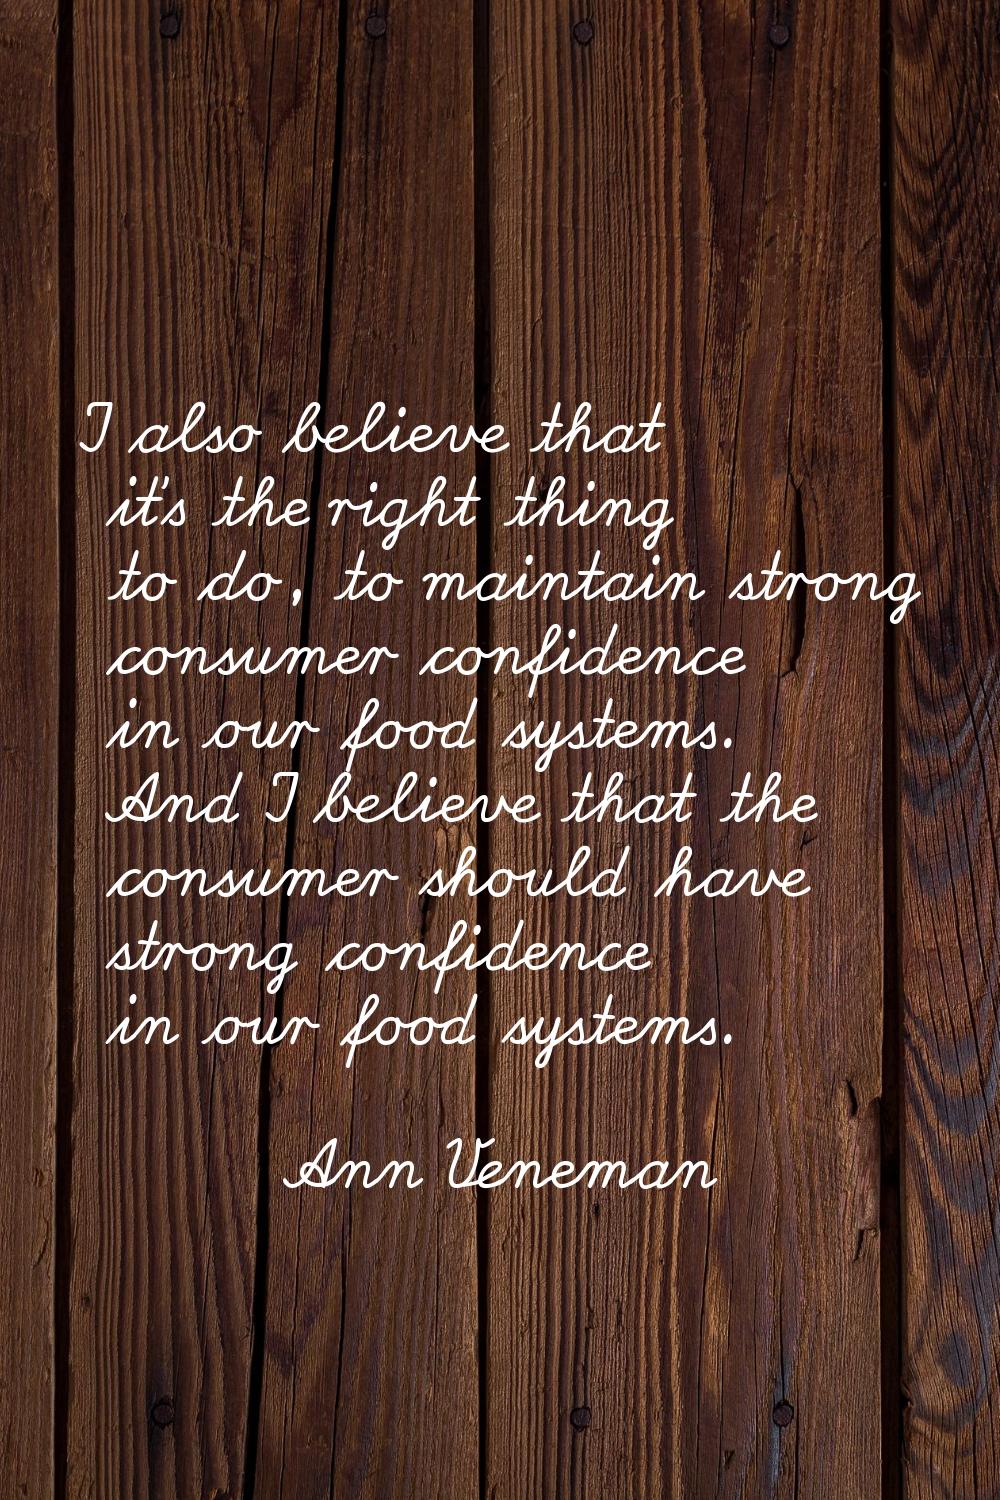 I also believe that it's the right thing to do, to maintain strong consumer confidence in our food 